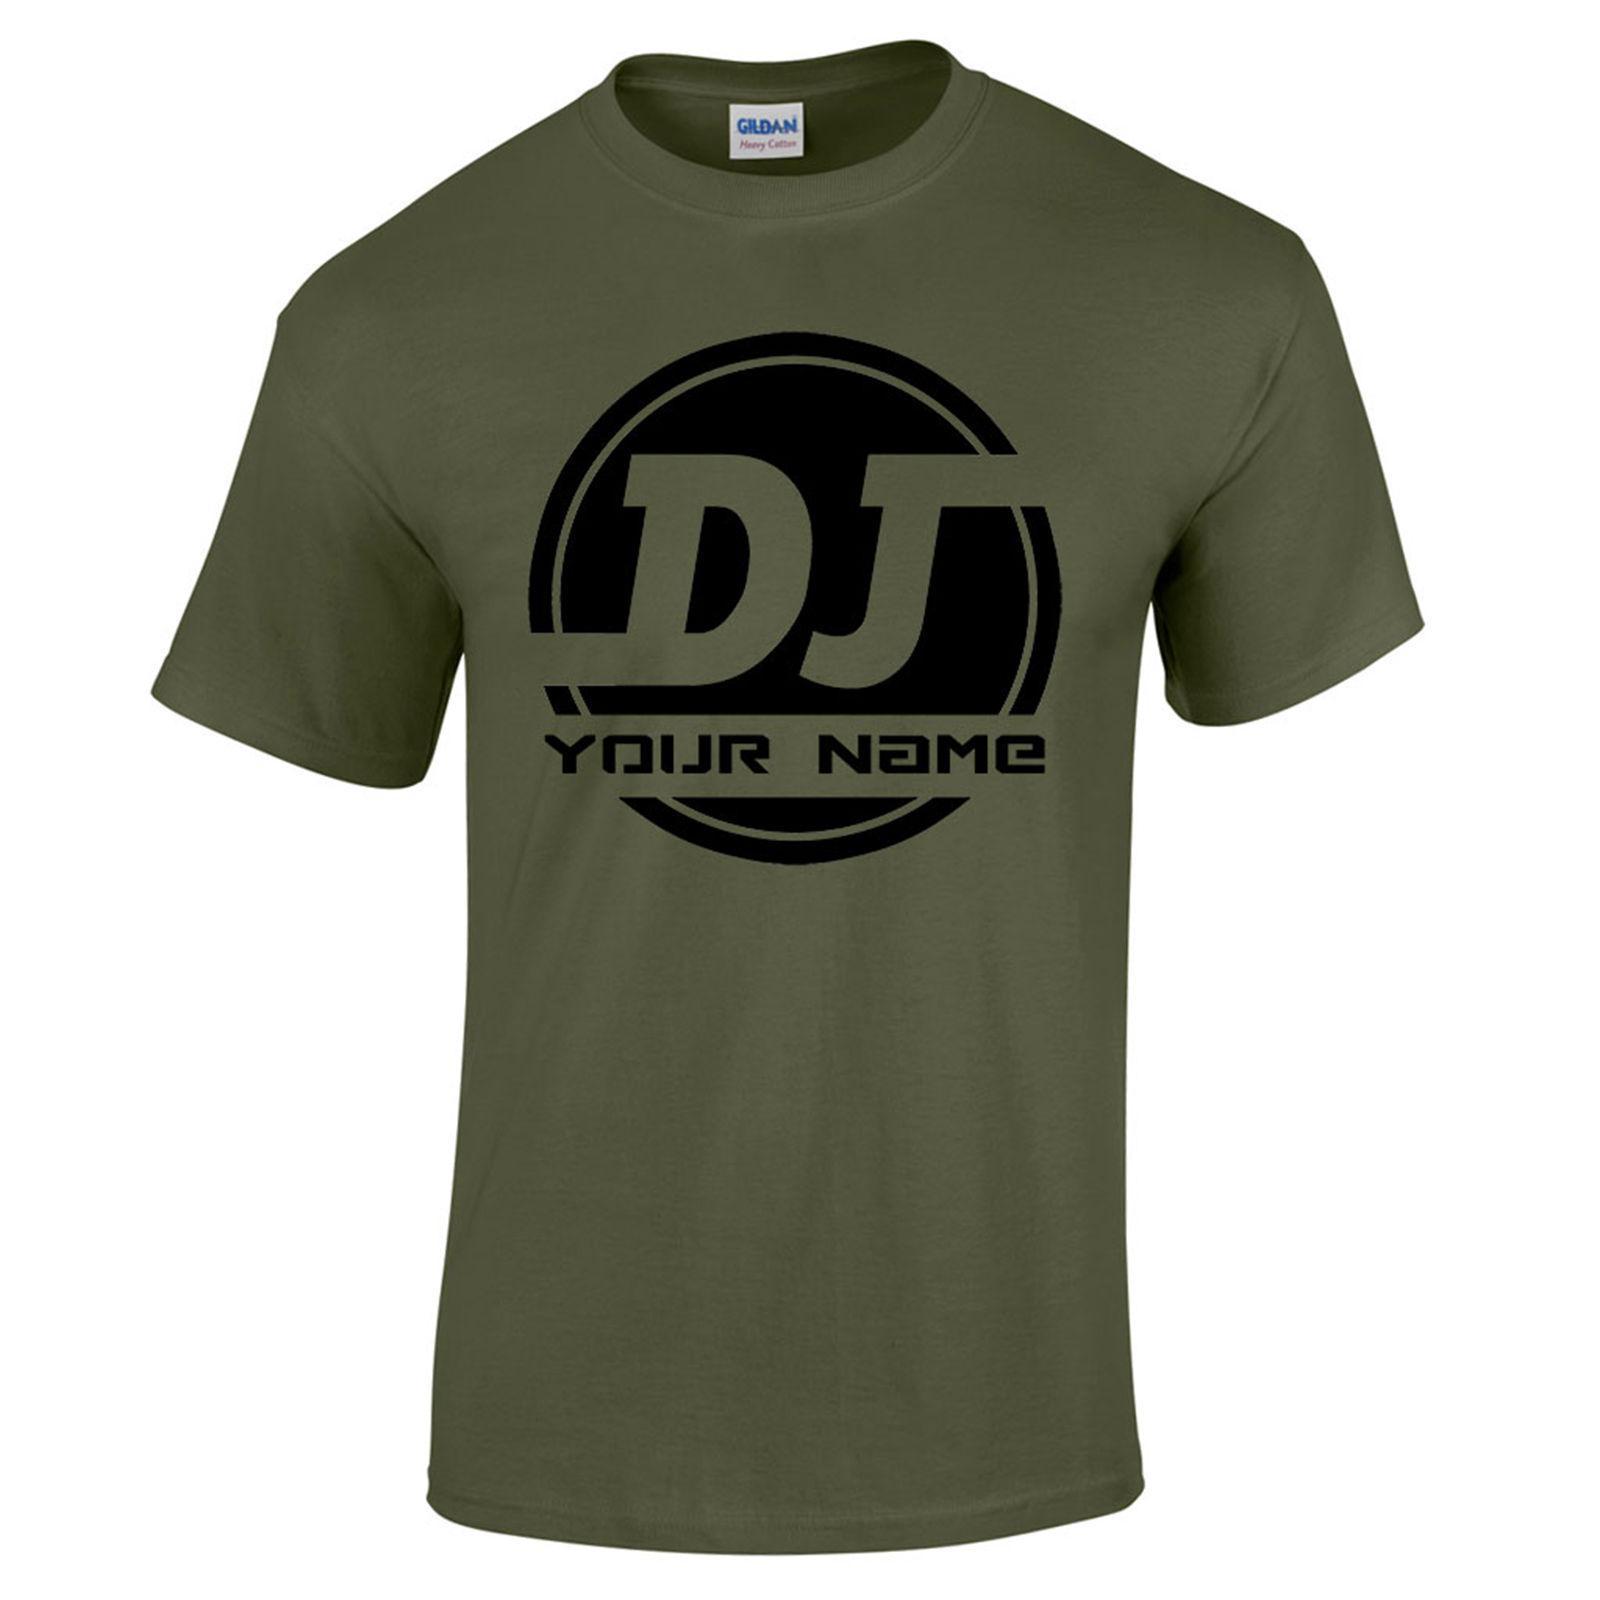 Your DJ Logo - Personalised DJ Logo ADD YOUR NAME Rave House Grime D&B Music Mens T